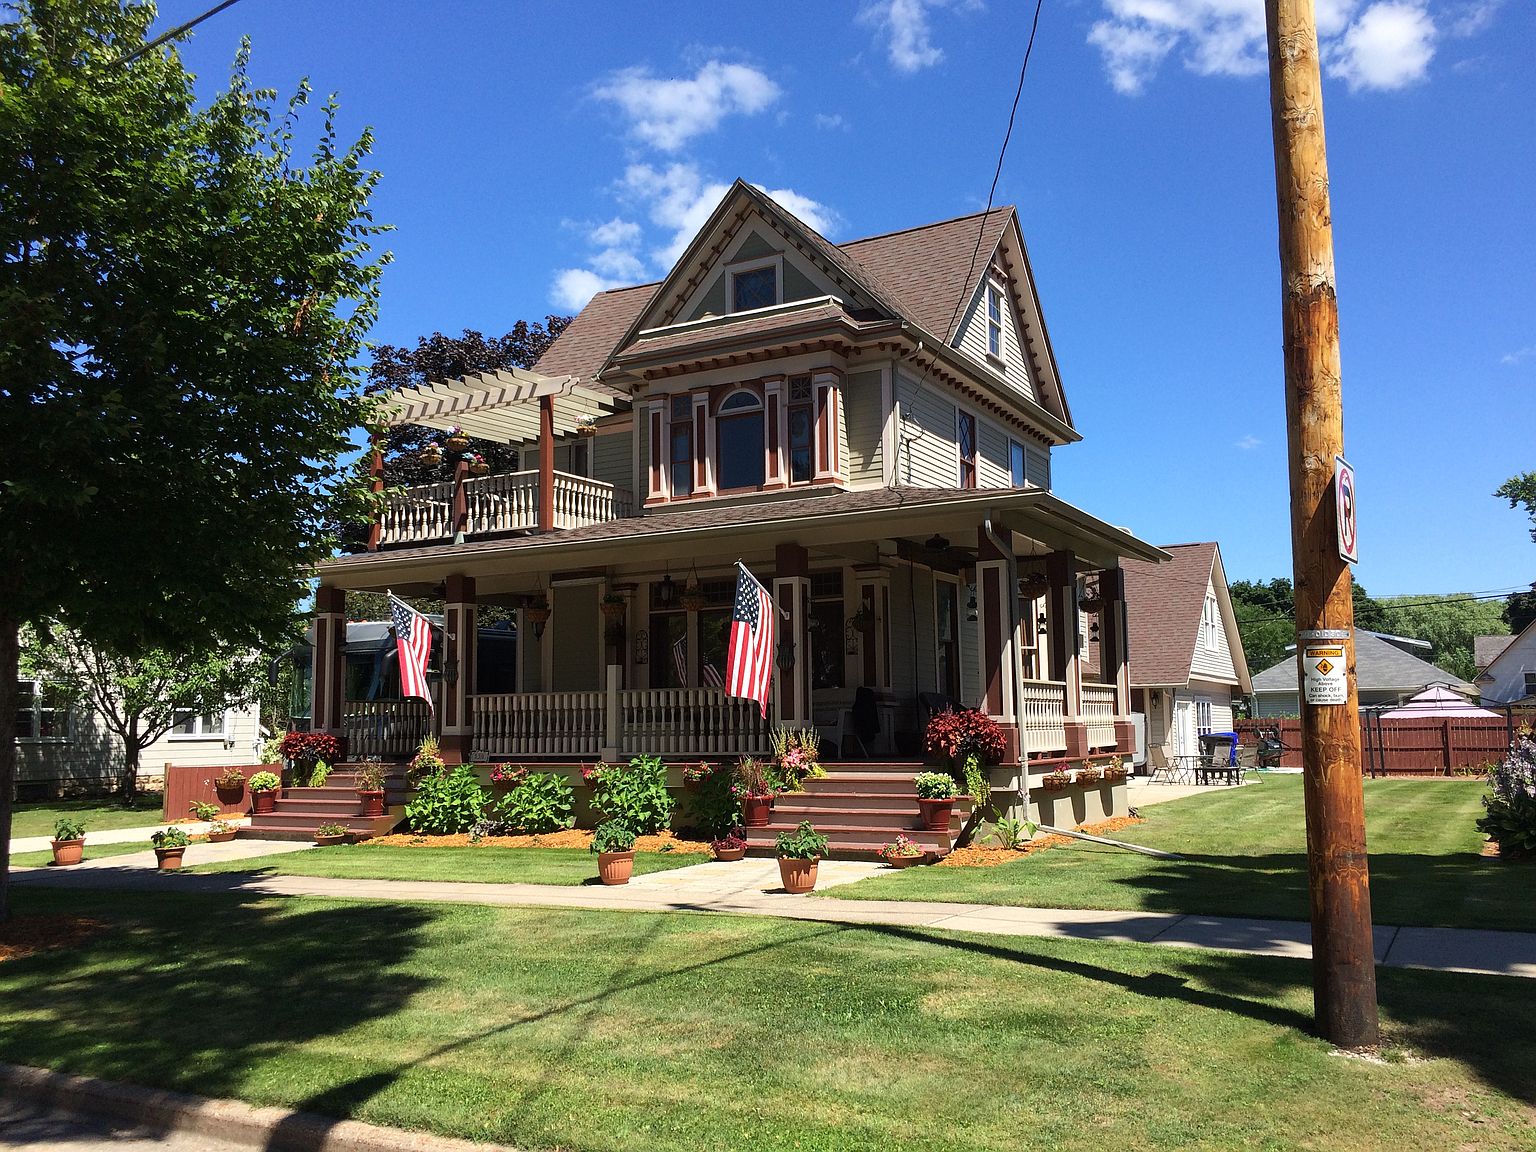 530 N Union St, Appleton, WI 54911 | Zillow